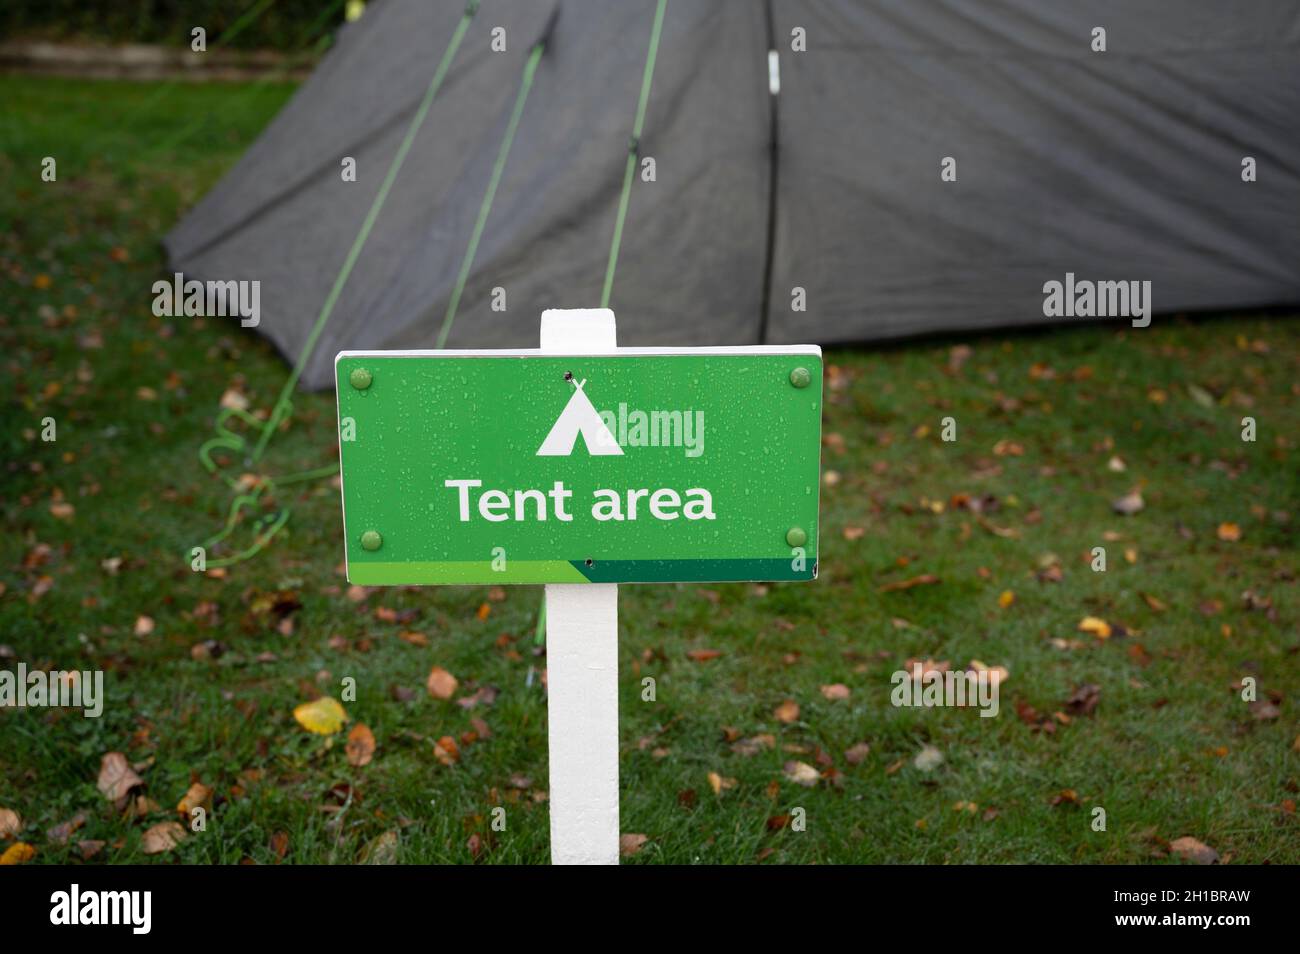 Green and white tent area sign with text and icon. Blurred background of tent, and grass with autumn leaves. Raindrops on sign. No people. Stock Photo